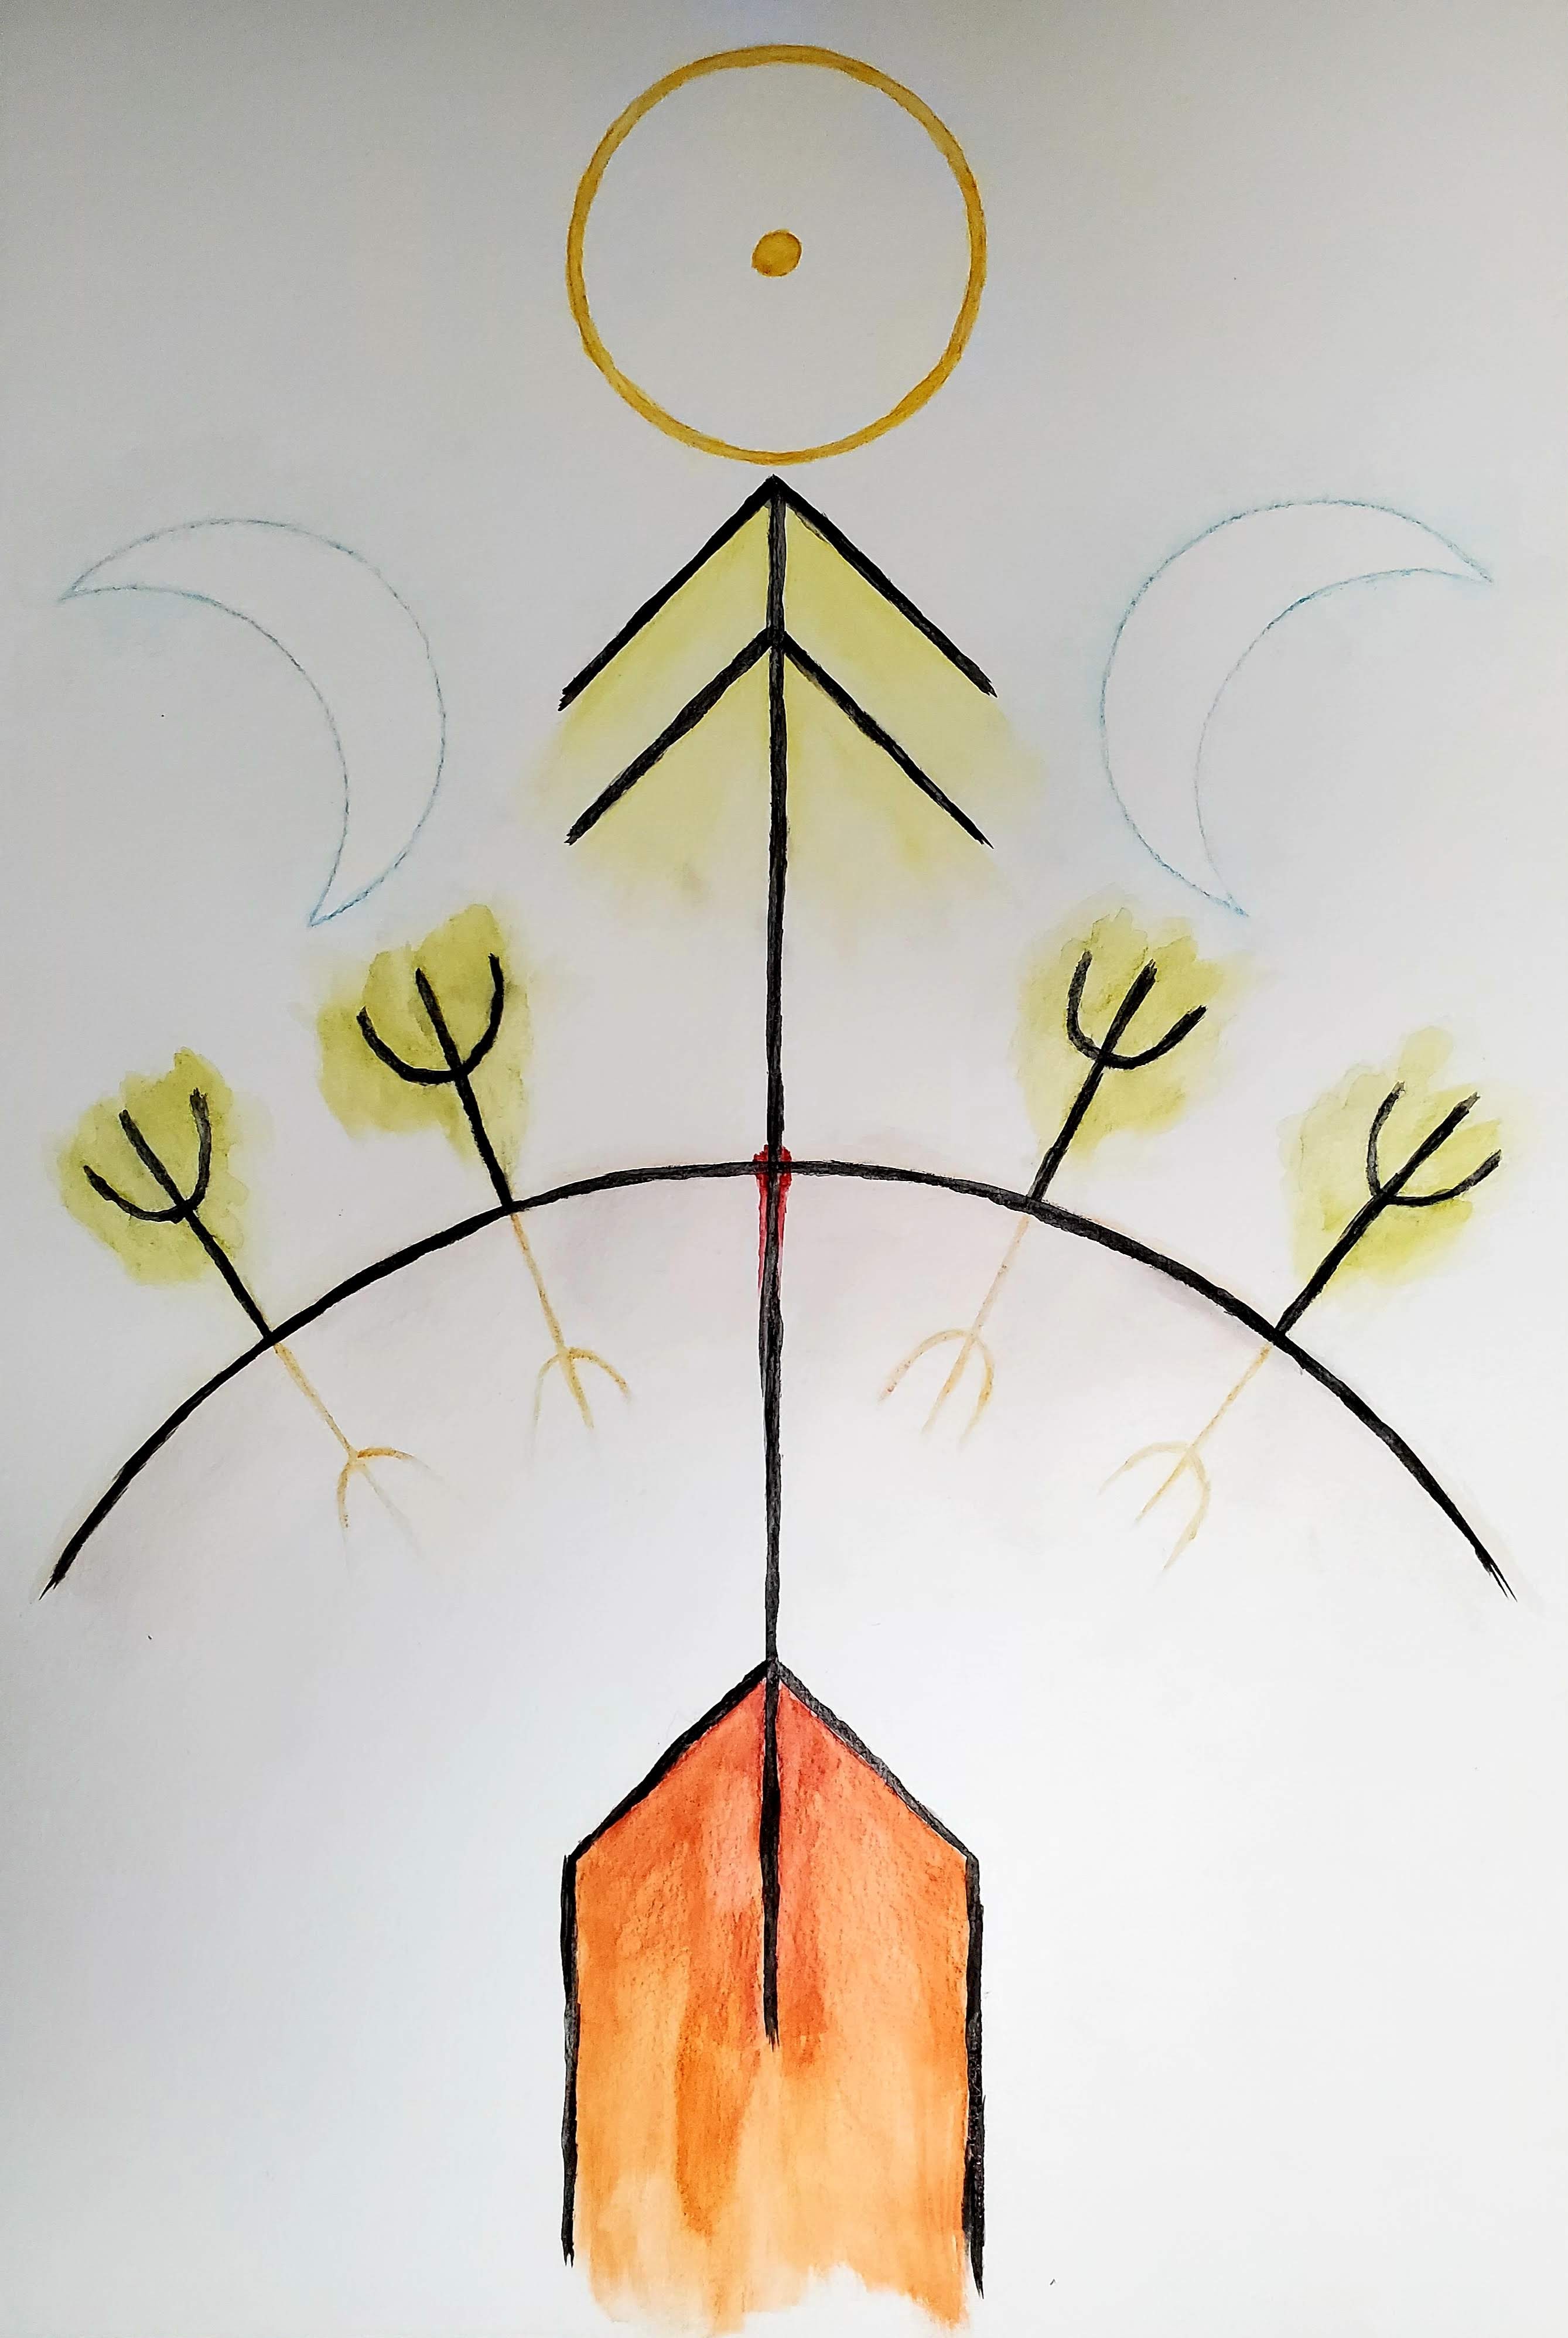 A rune inspired painting of an arrow rising from beneath the ground to the sun